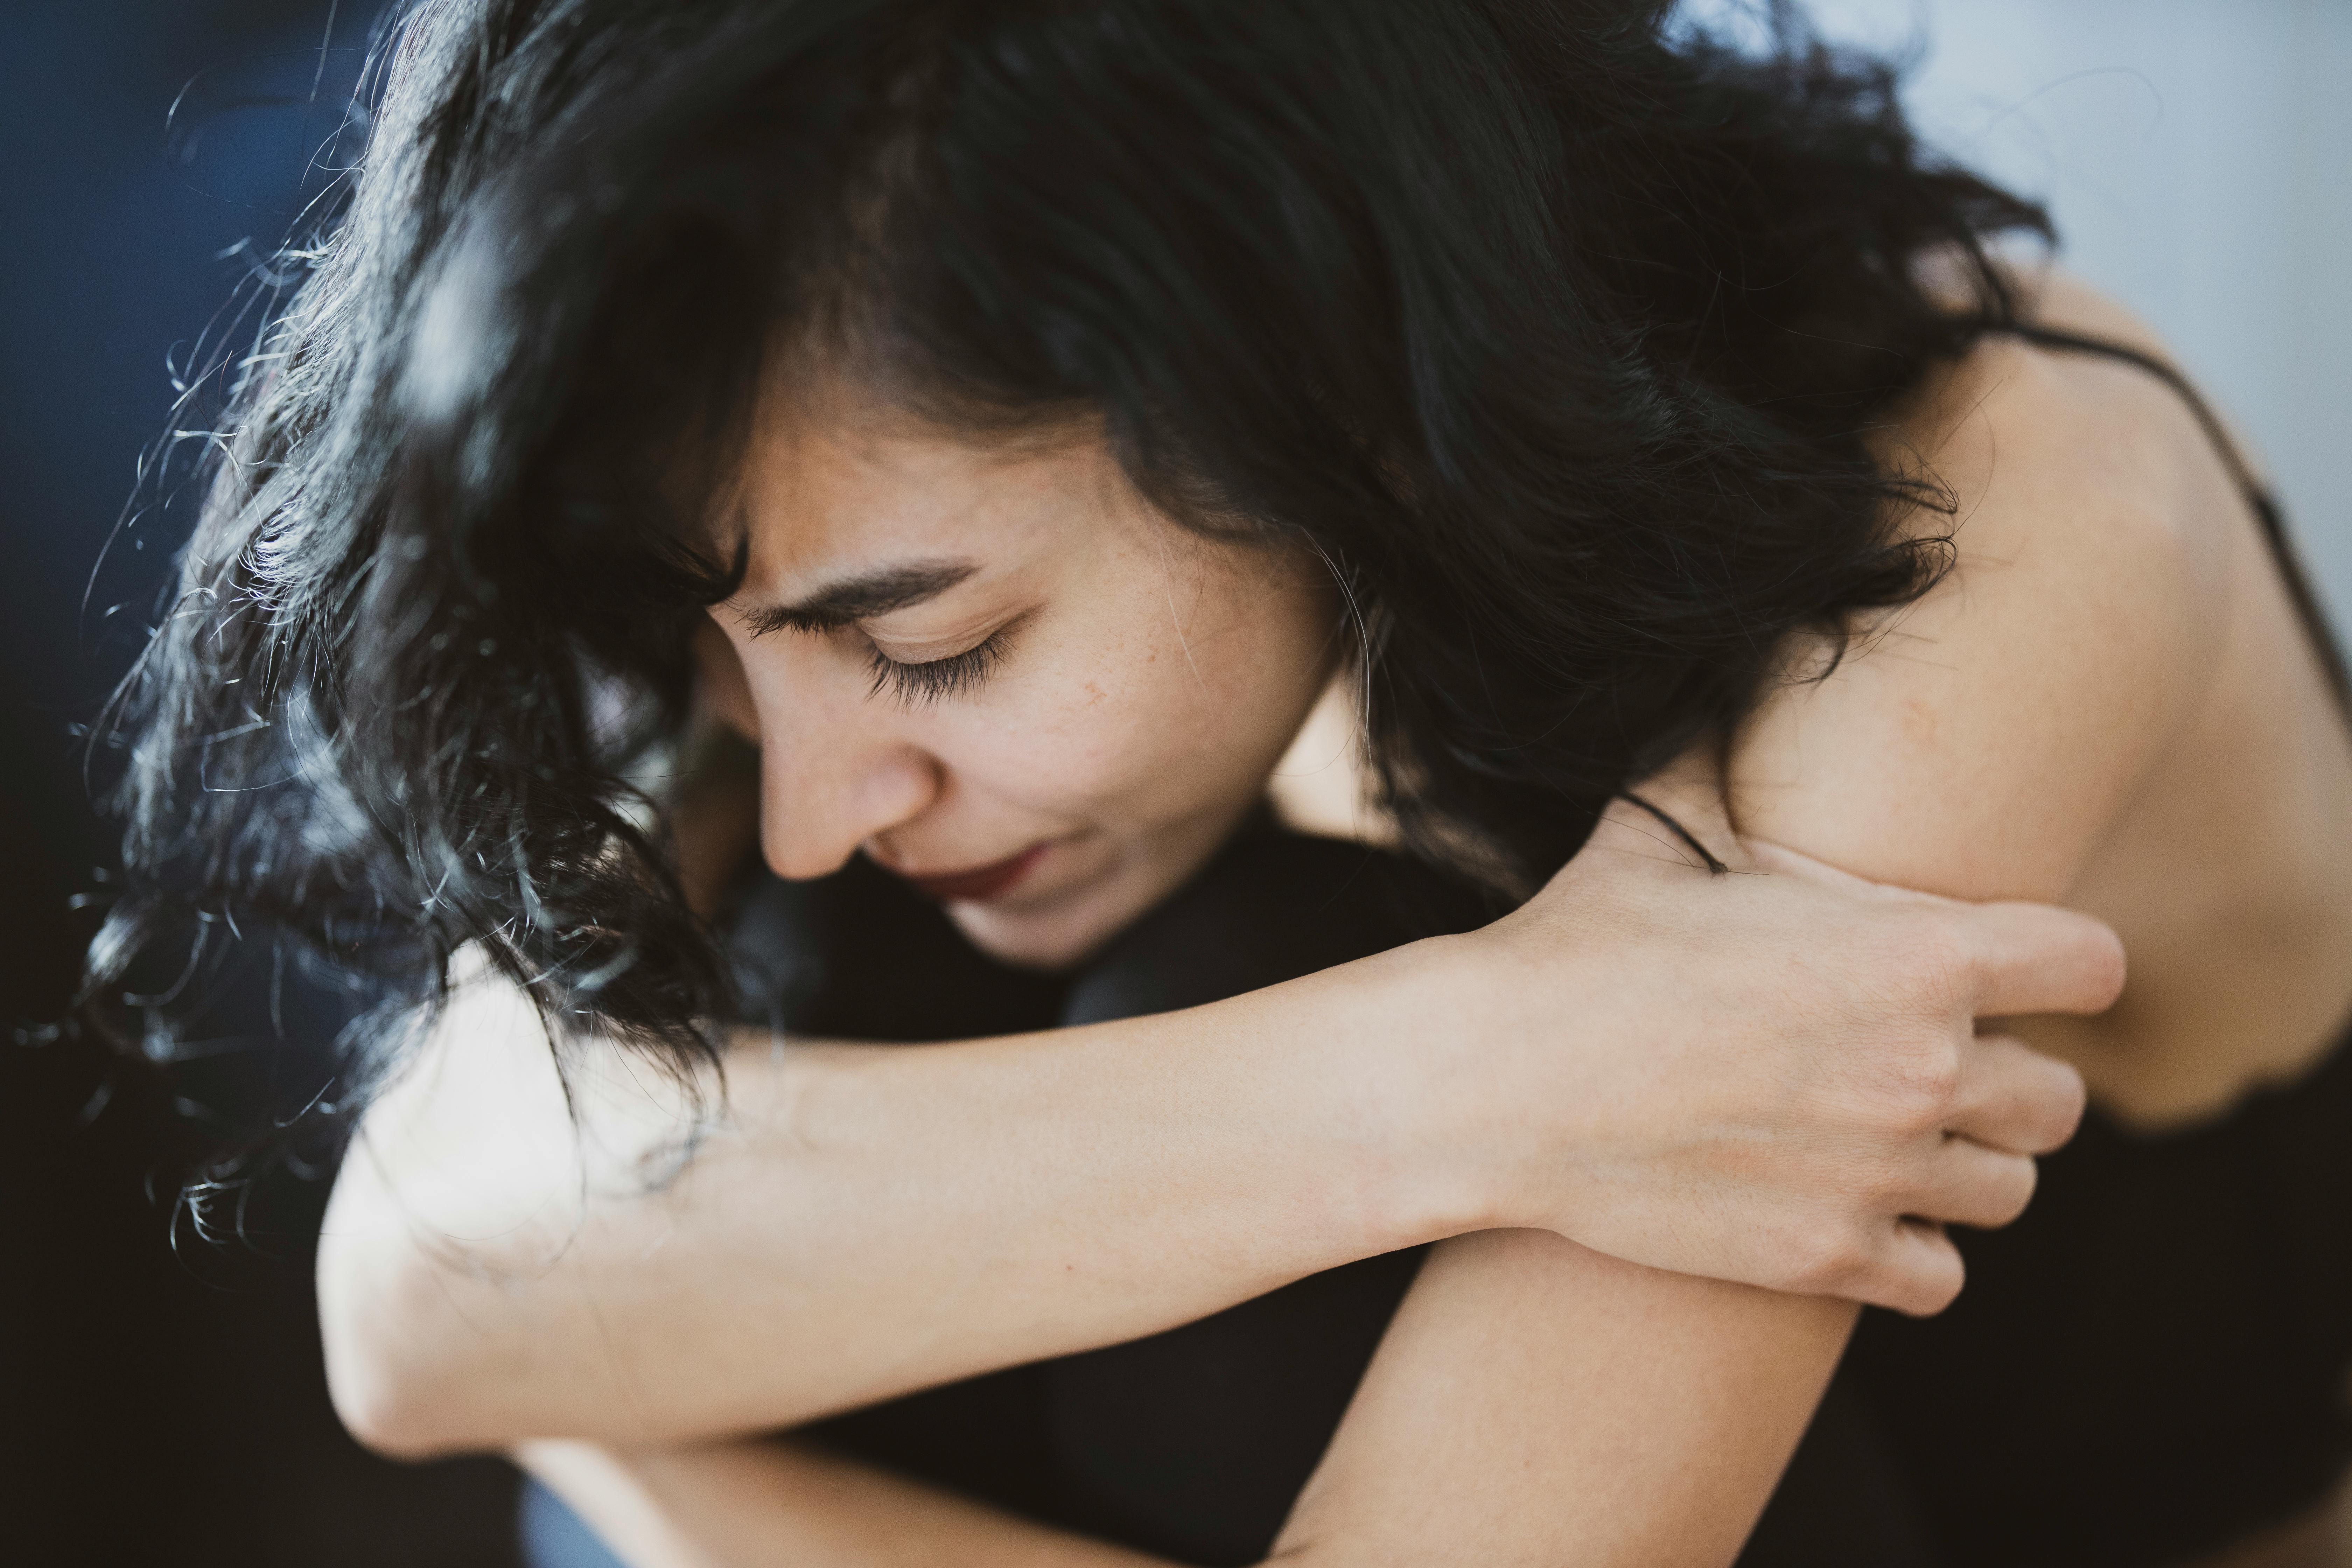 A sad woman embracing herself while seated | Source: Pexels